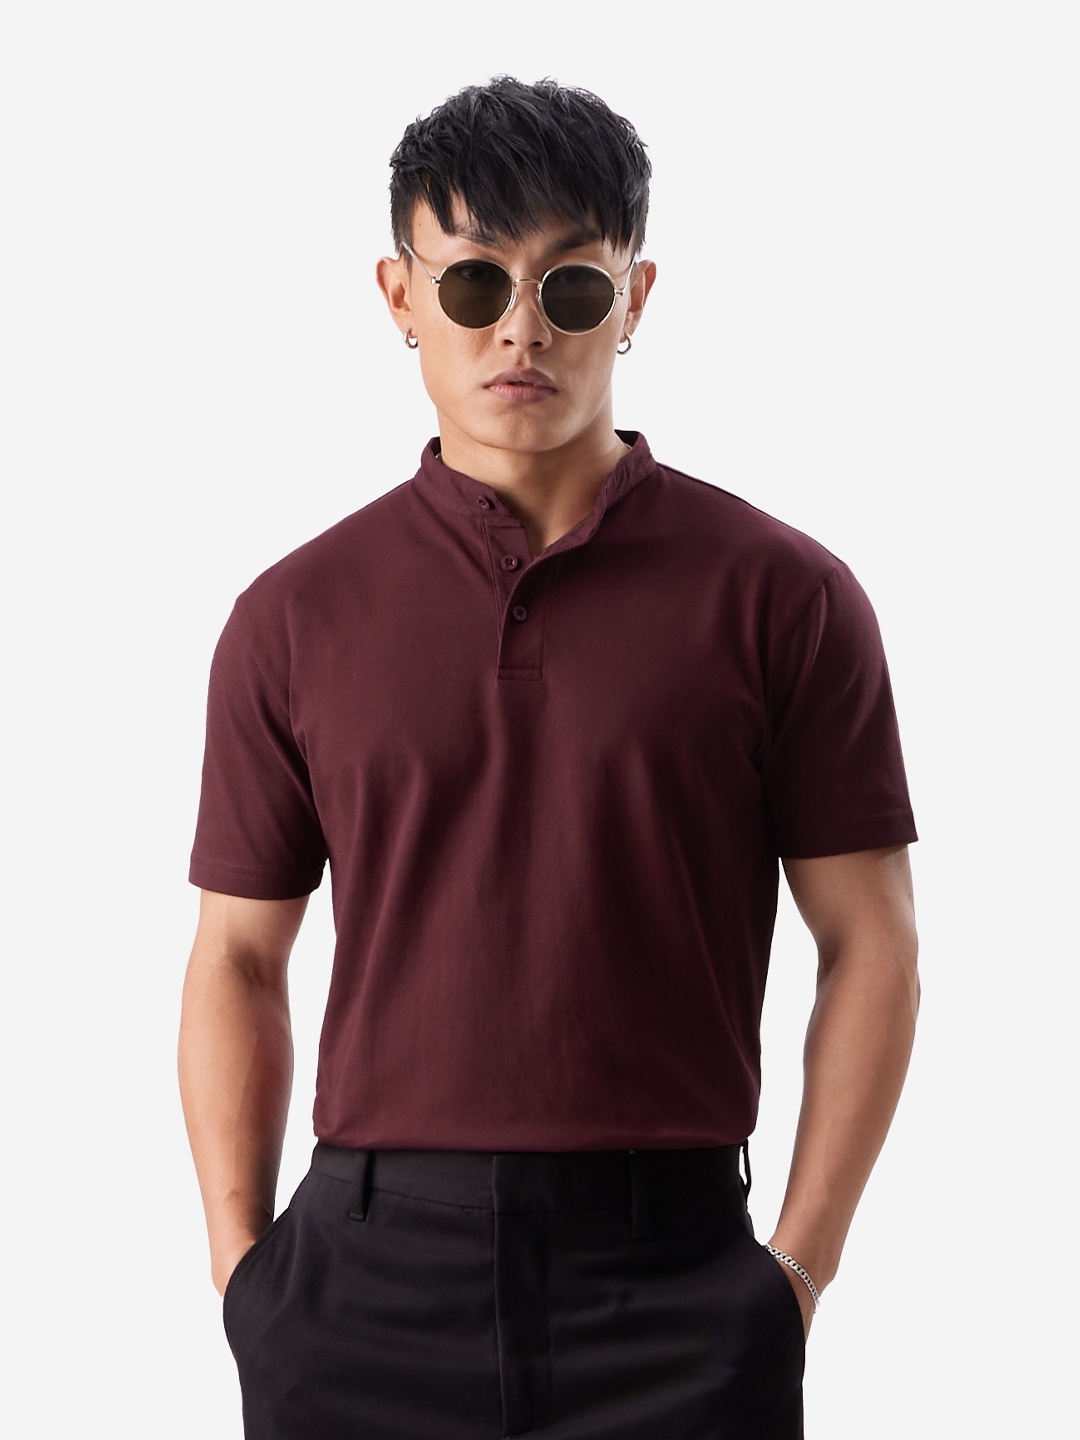 The Souled Store | Men's Solids: Rich Maroon Mandarin Polo T-Shirt